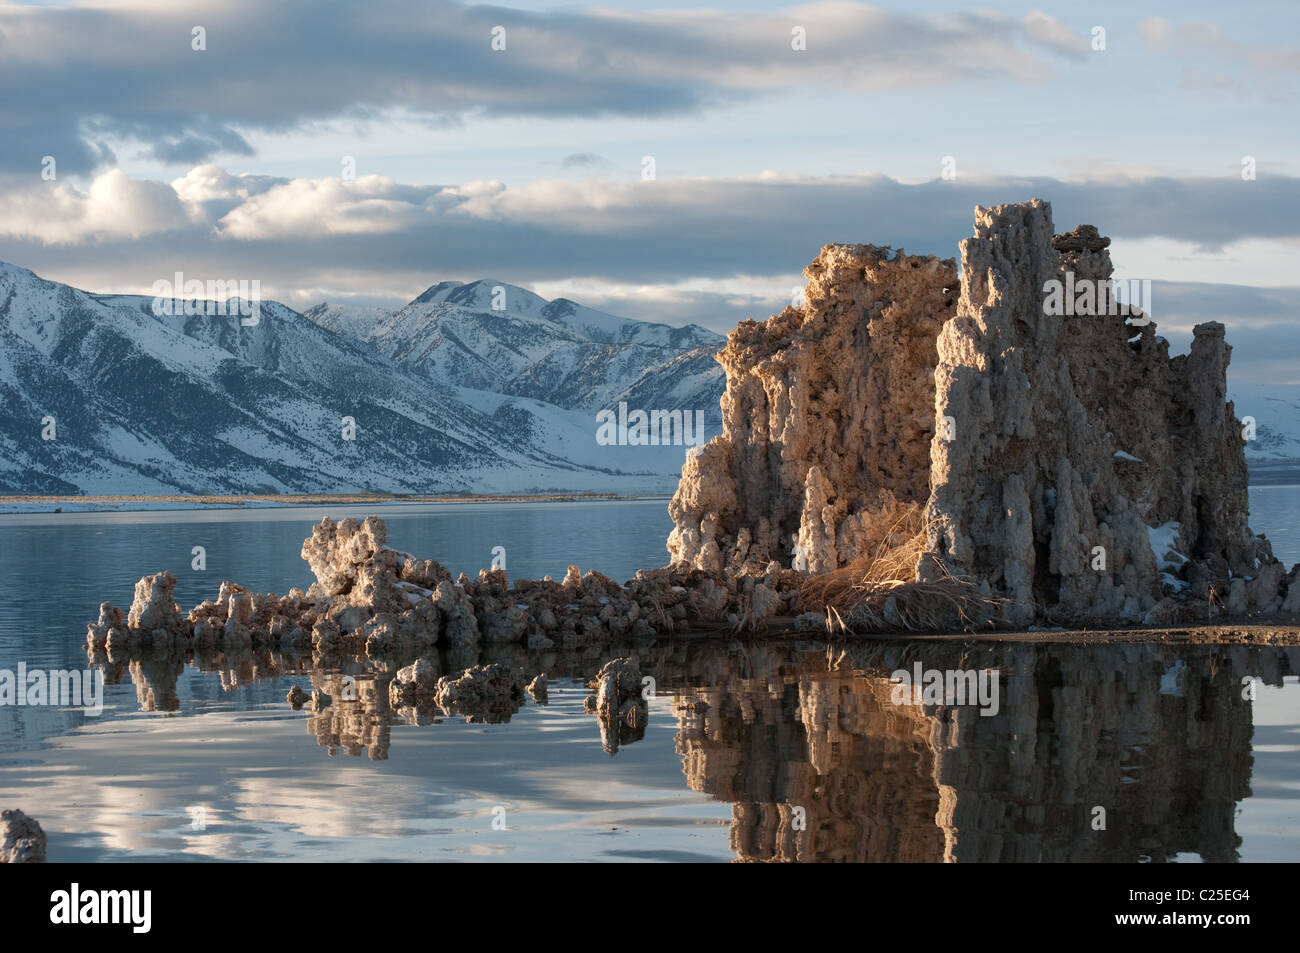 Calcium formed tufa structures emerge from the western Hemisphere's oldest continuously filled salt lake against snowy mountains Stock Photo